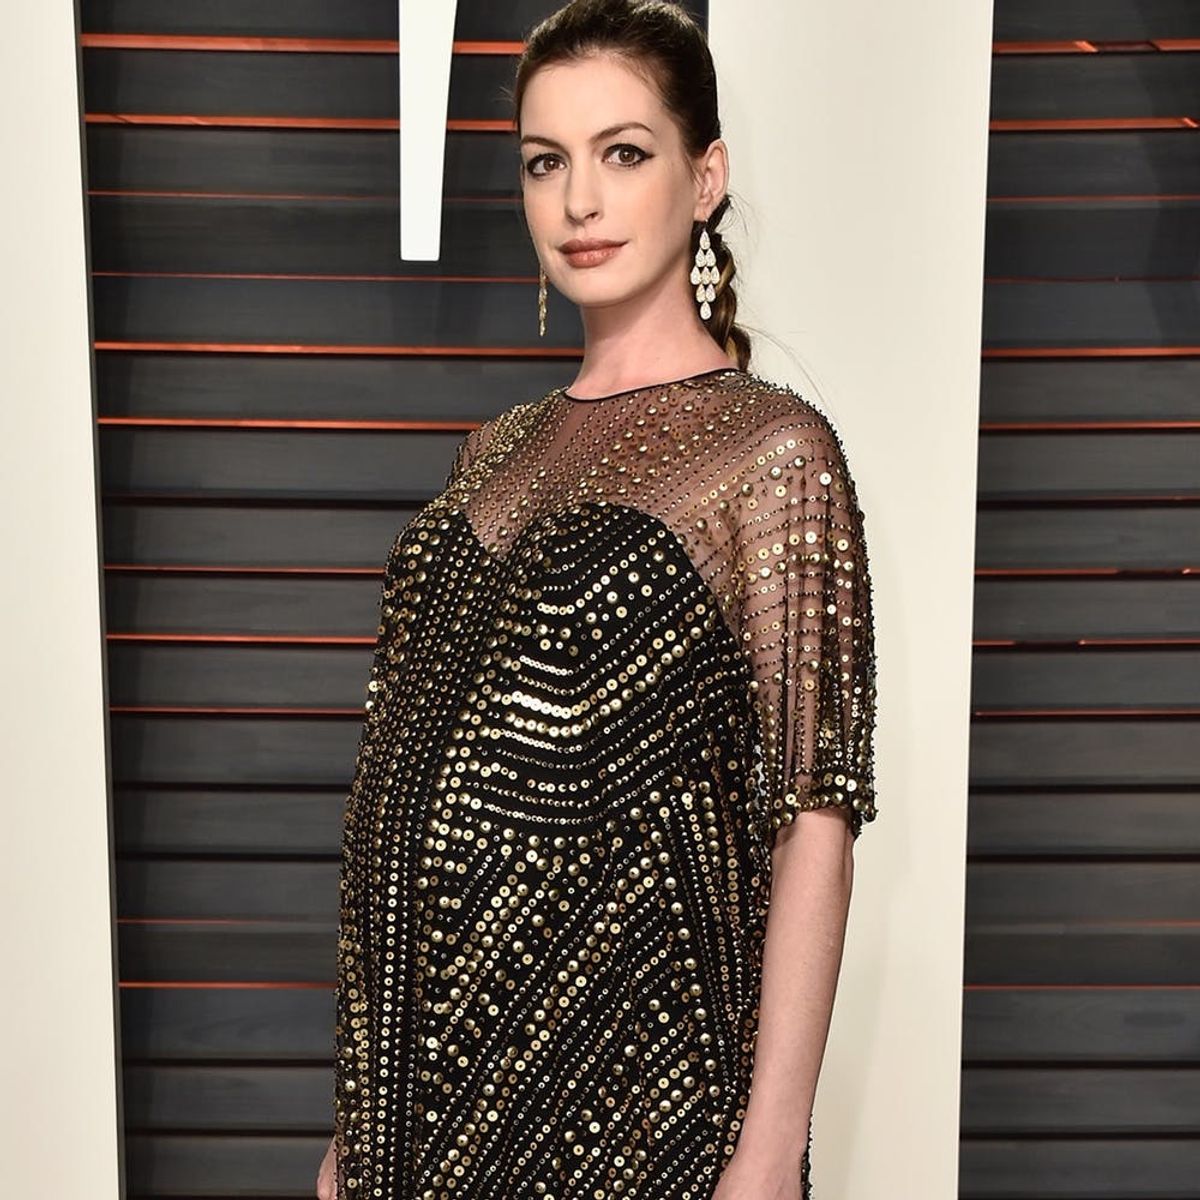 Anne Hathaway Has Some A+ Thoughts About Her Post-Baby Bod